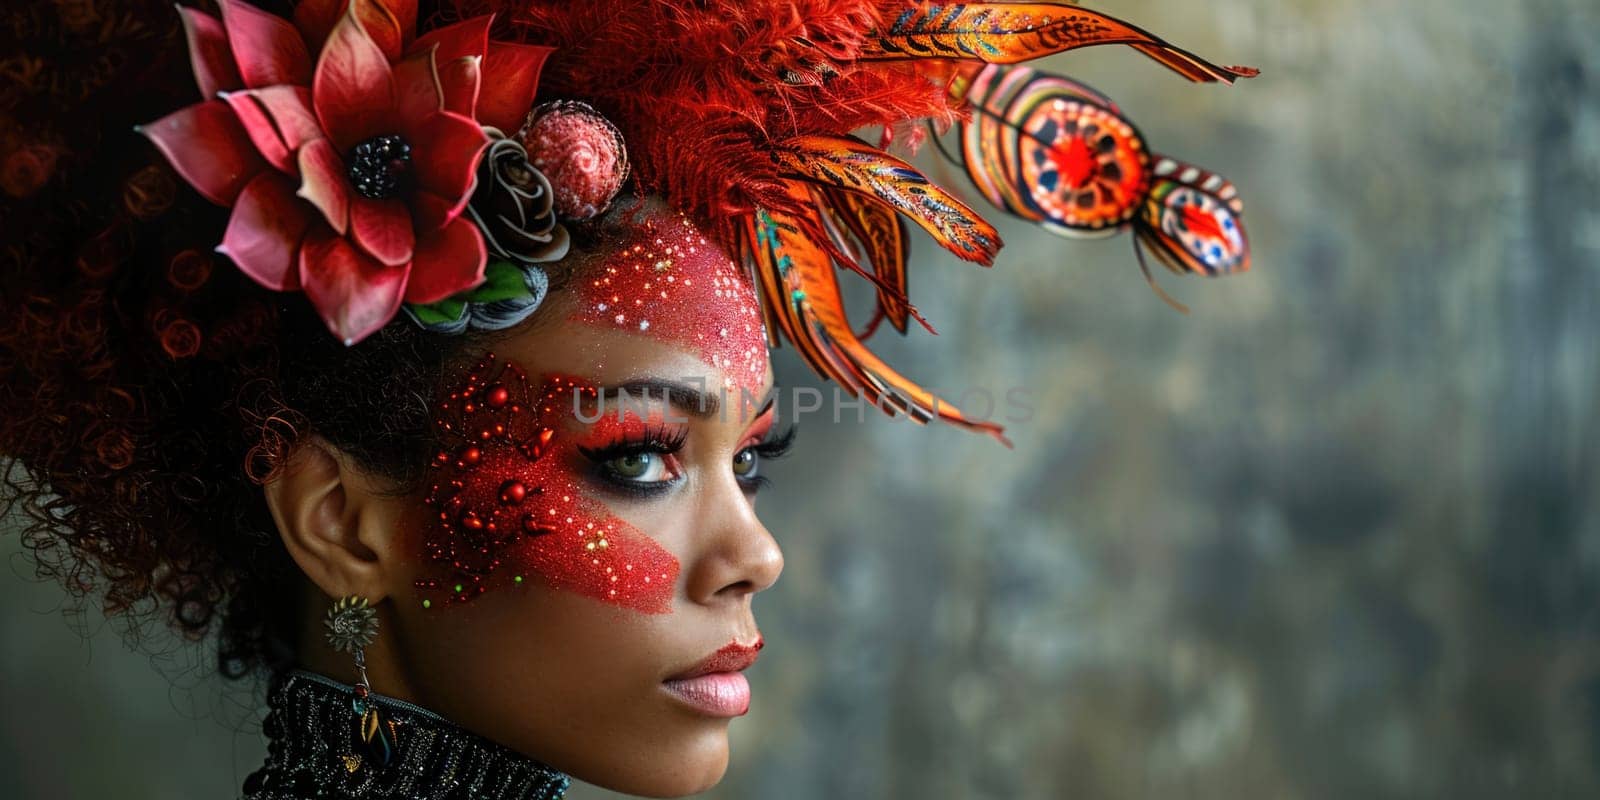 A portrait of a woman wearing vibrant red makeup and a striking feathered headdress.